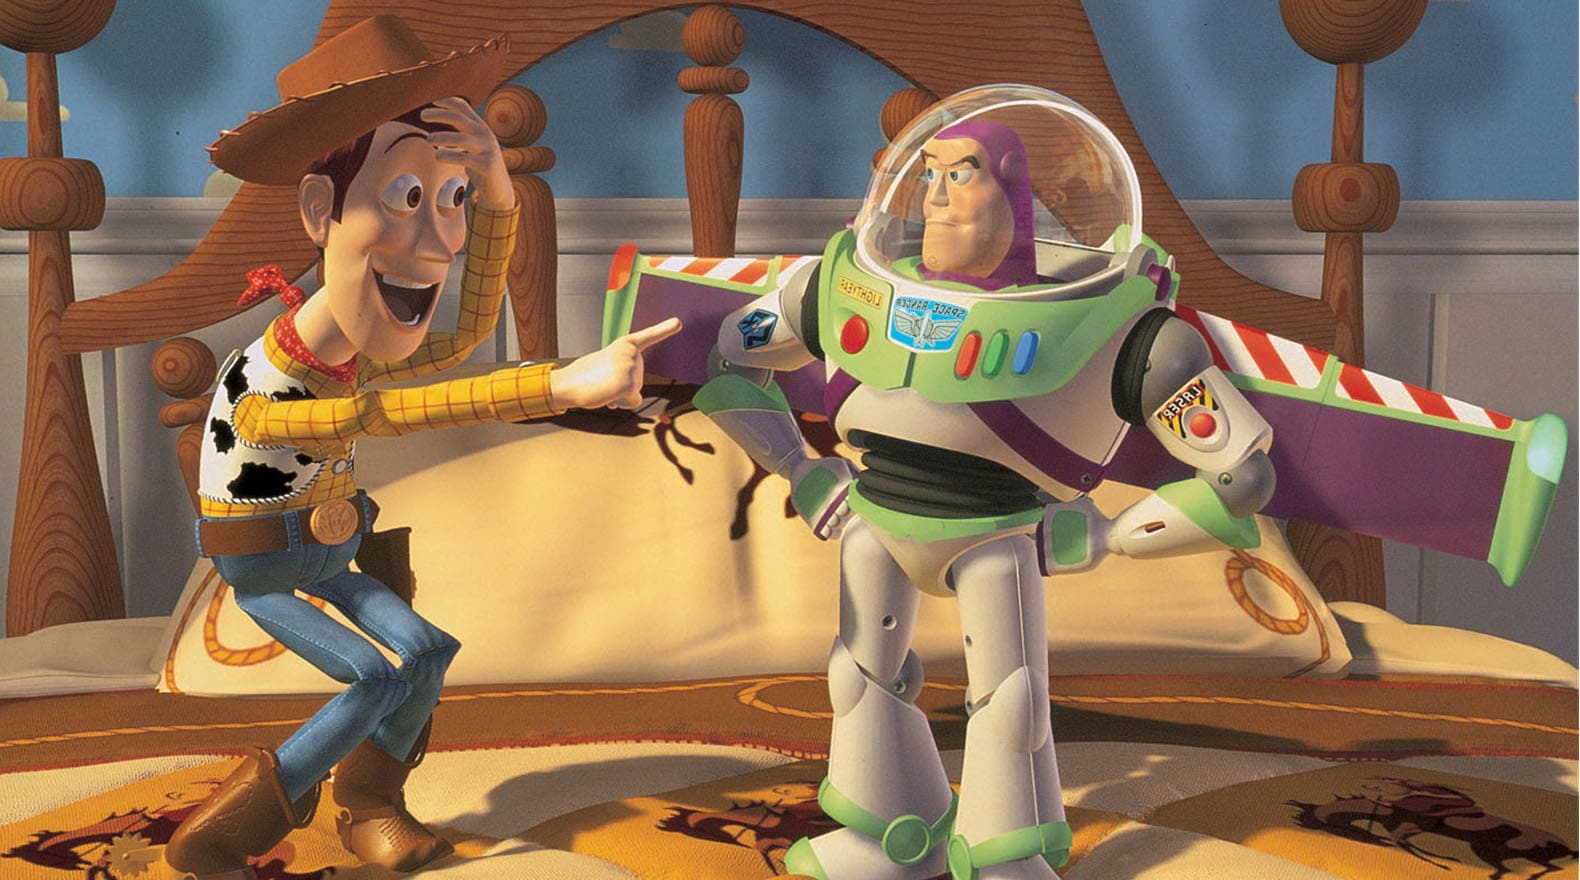 Woody laughs at Buzz Lightyear on Andy's bed in Toy Story 1